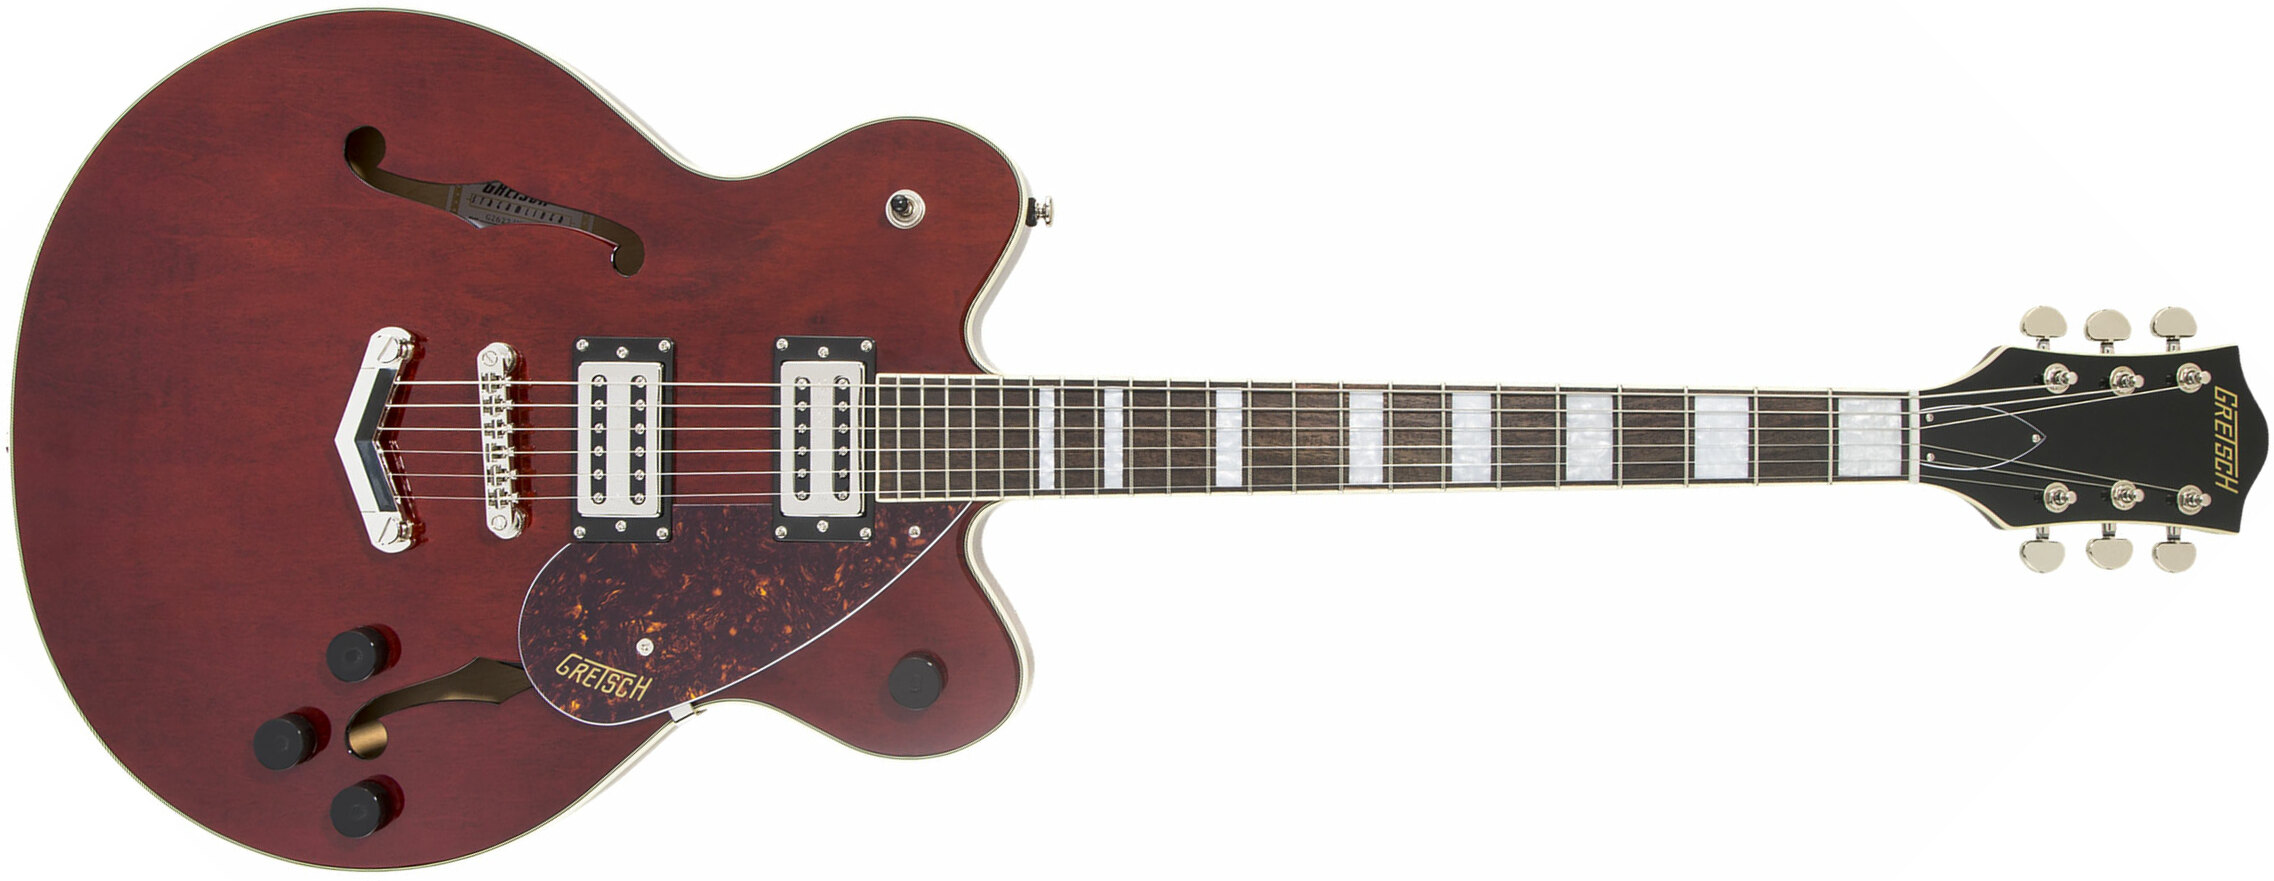 Gretsch G2622 Streamliner Center Block V-stoptail Hh Ht Lau - Walnut Stain - Semi-hollow electric guitar - Main picture